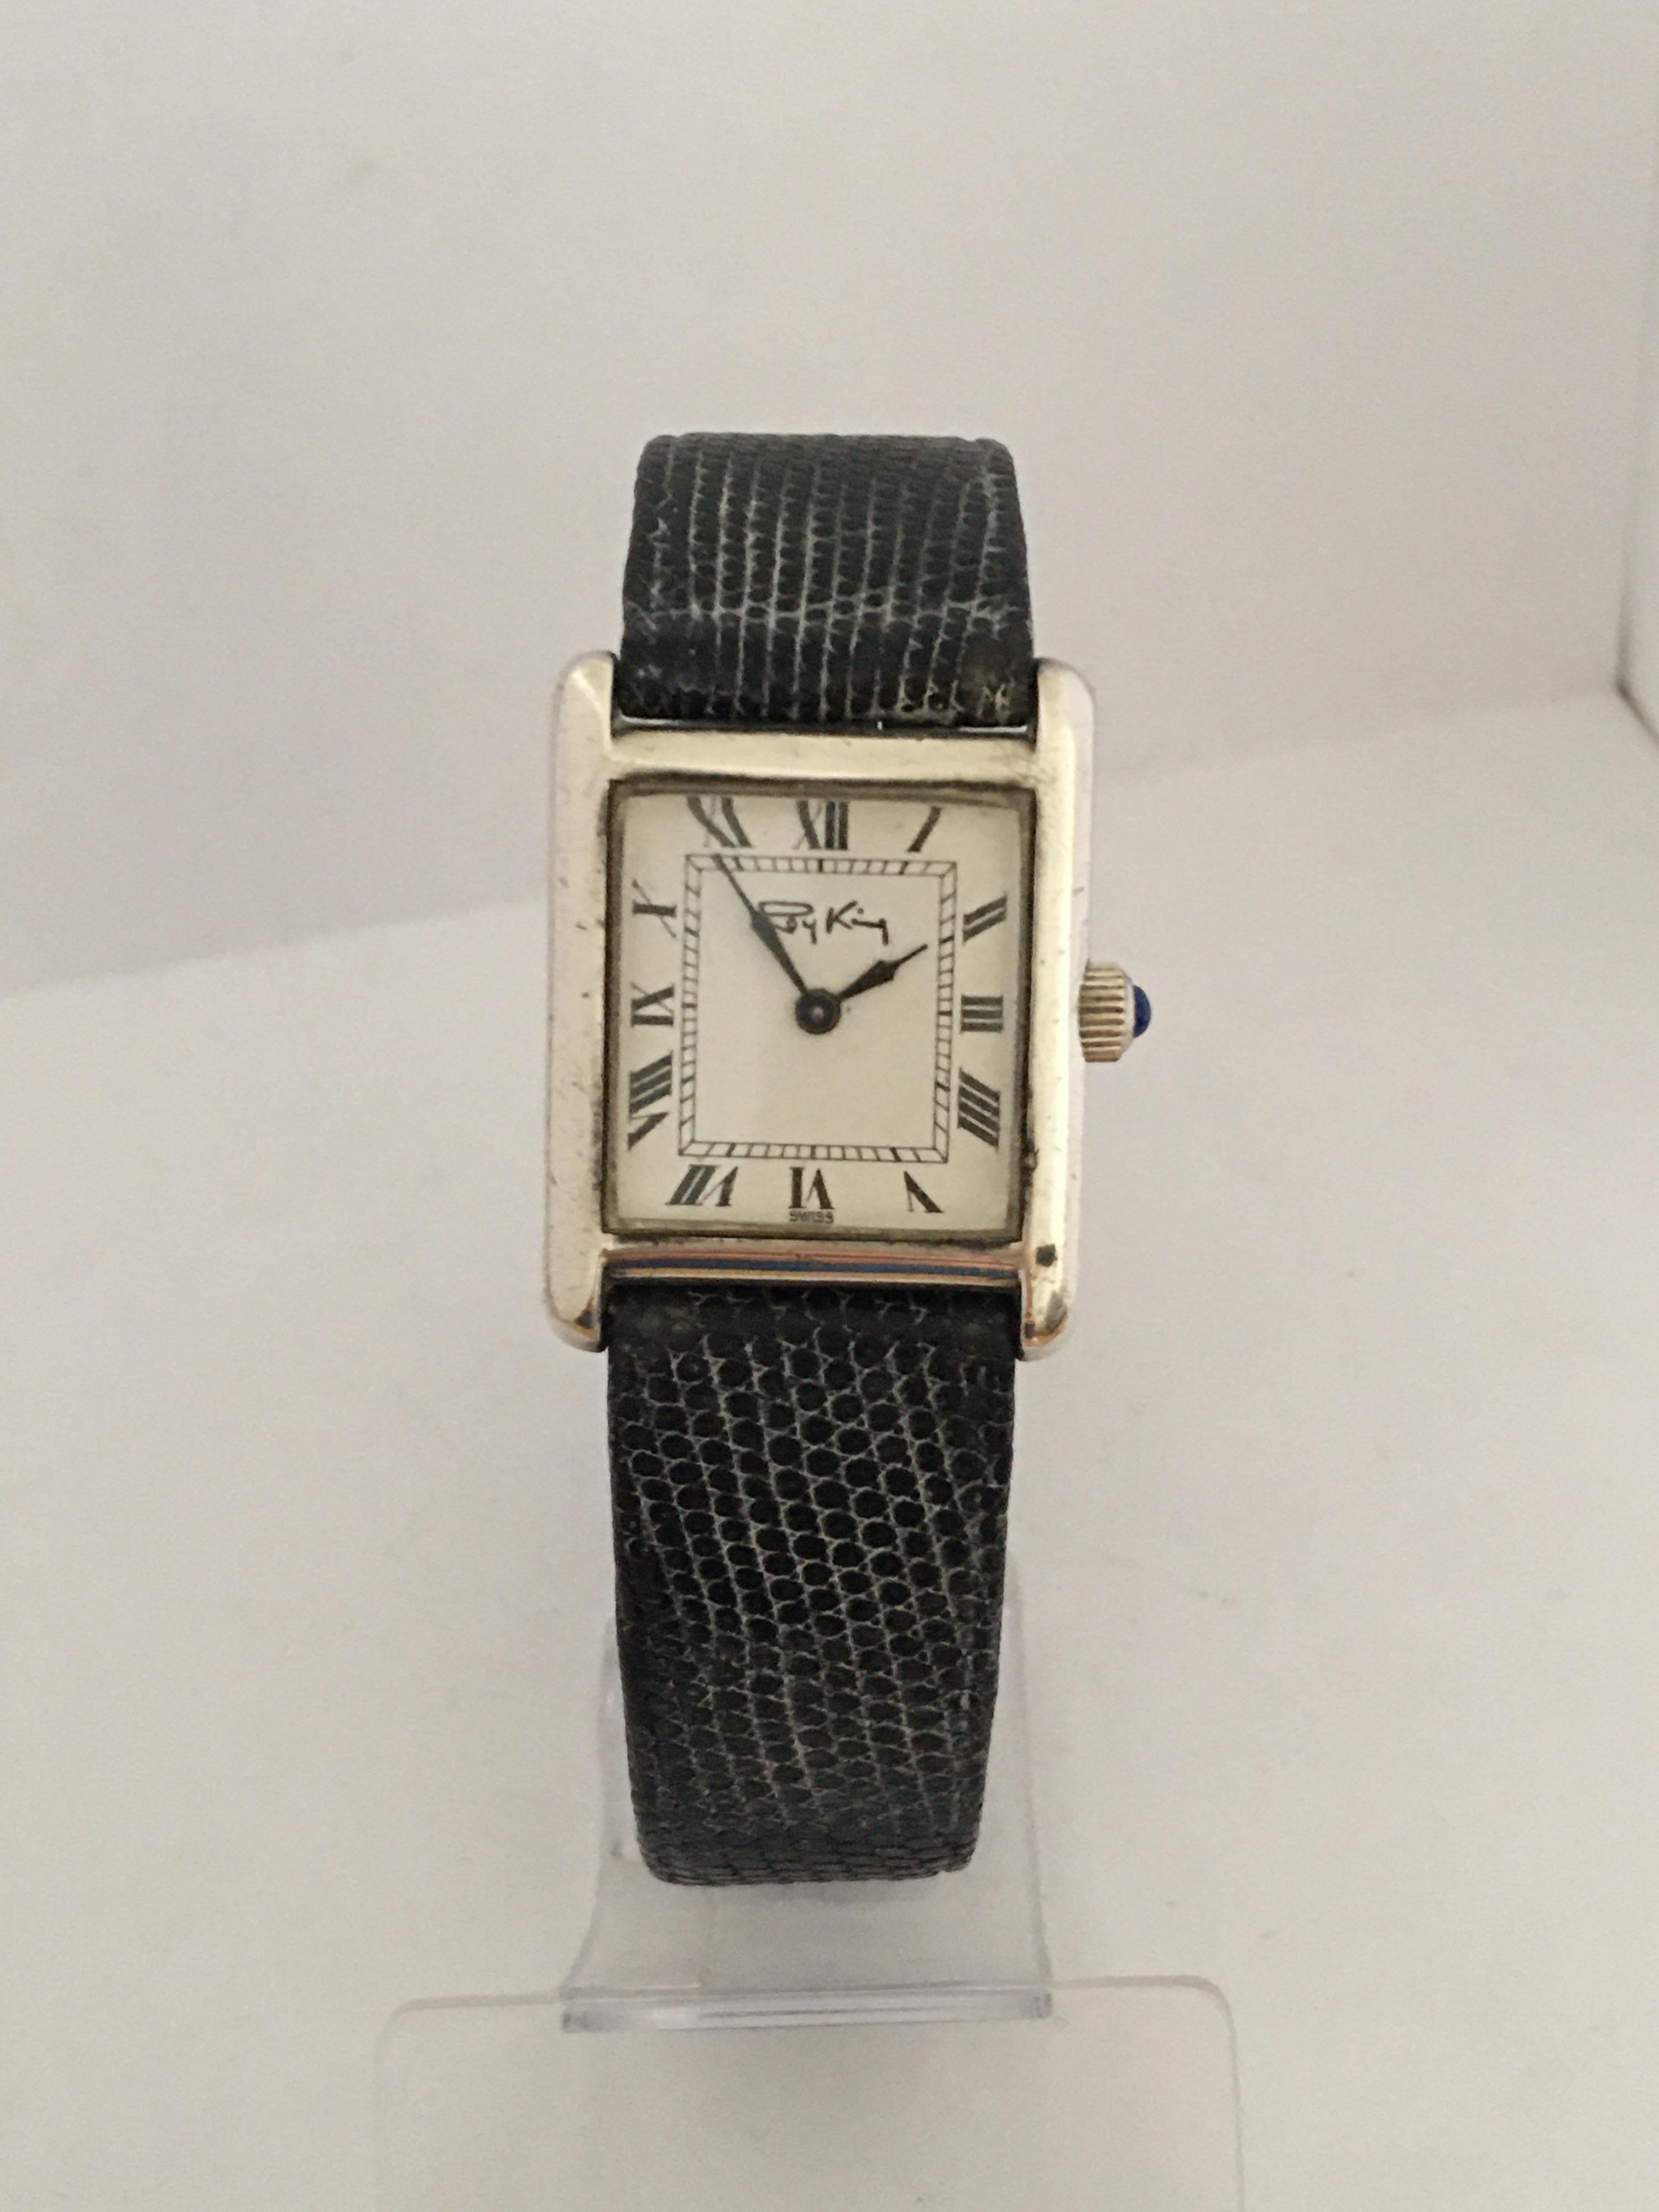 Vintage 1977 Roy King Solid Silver Tank Watch 8